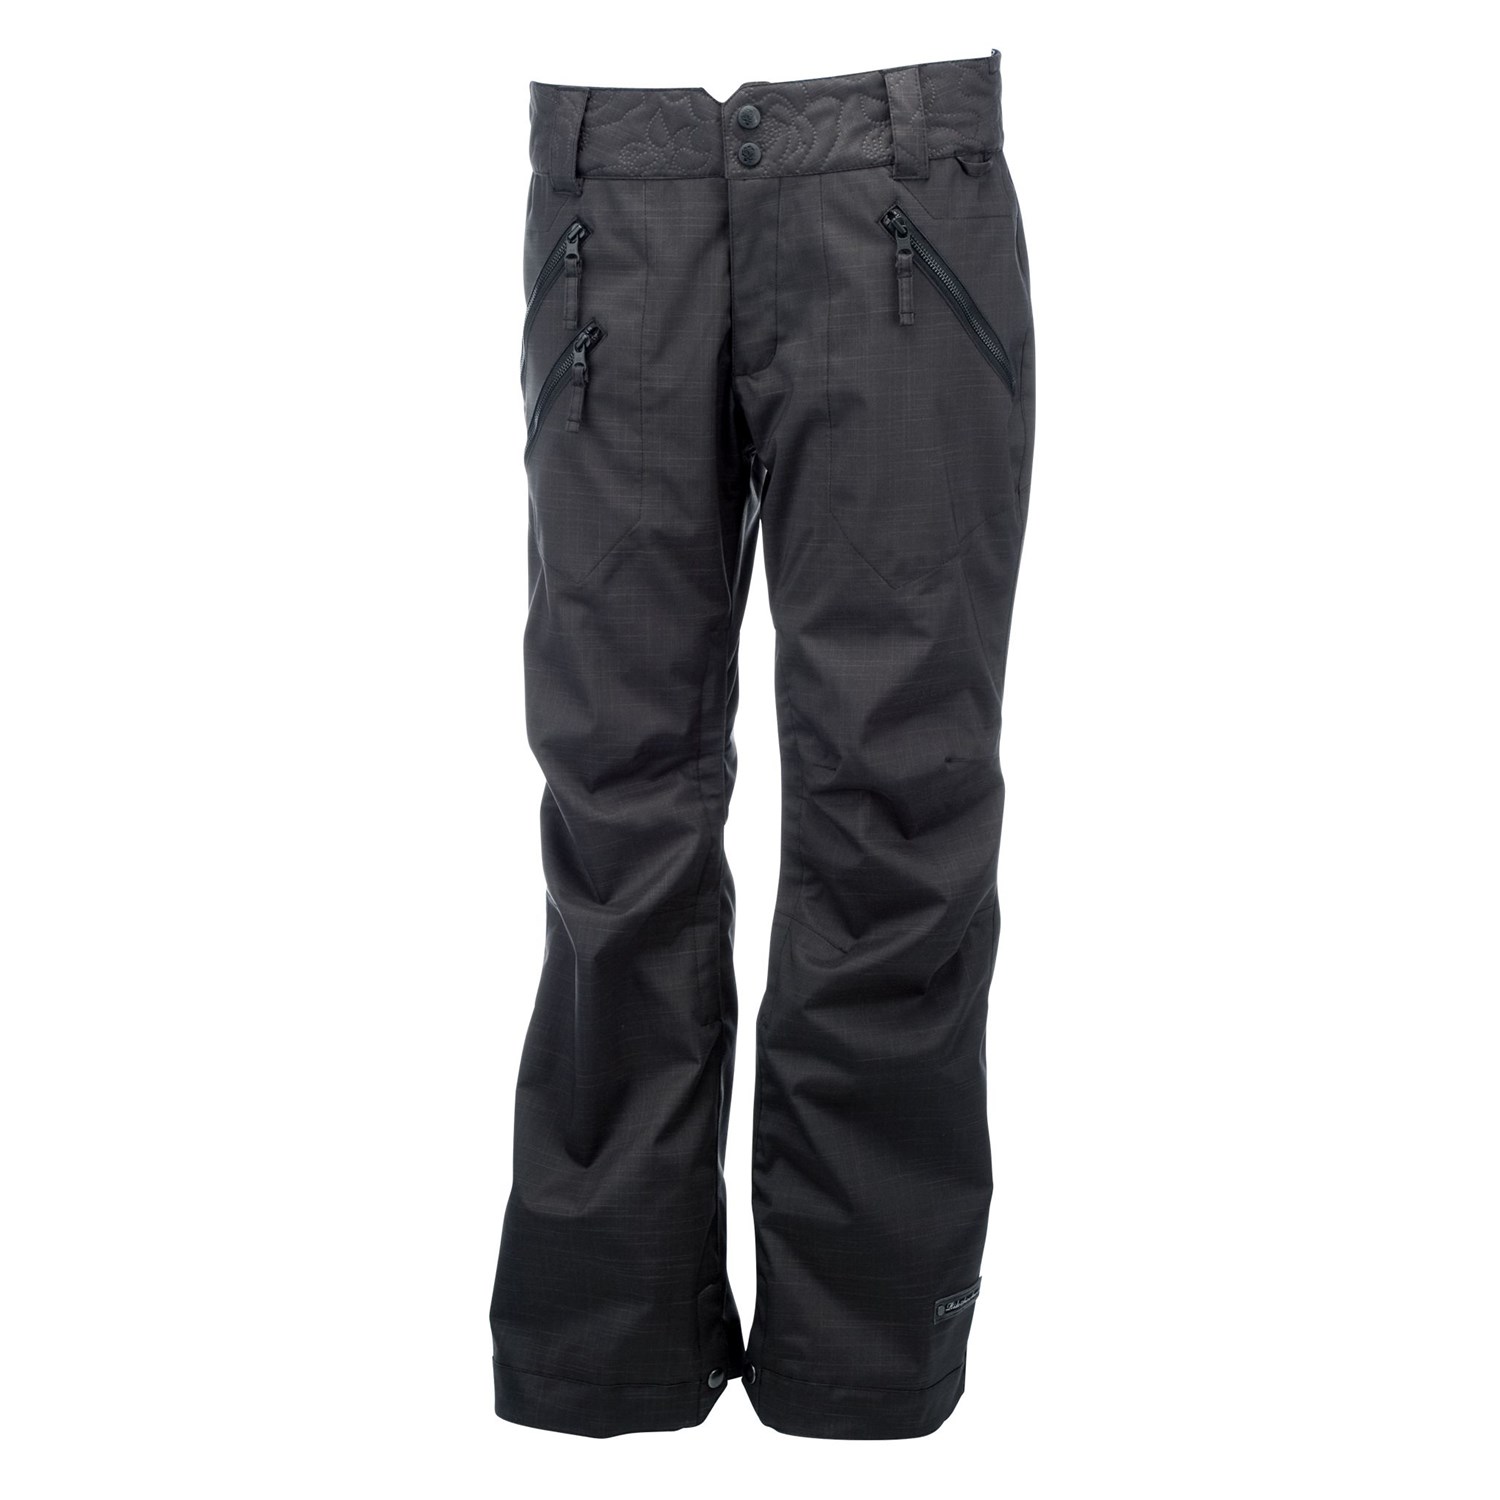 Cappel Calling Snowboard Pant Review  The Good Ride